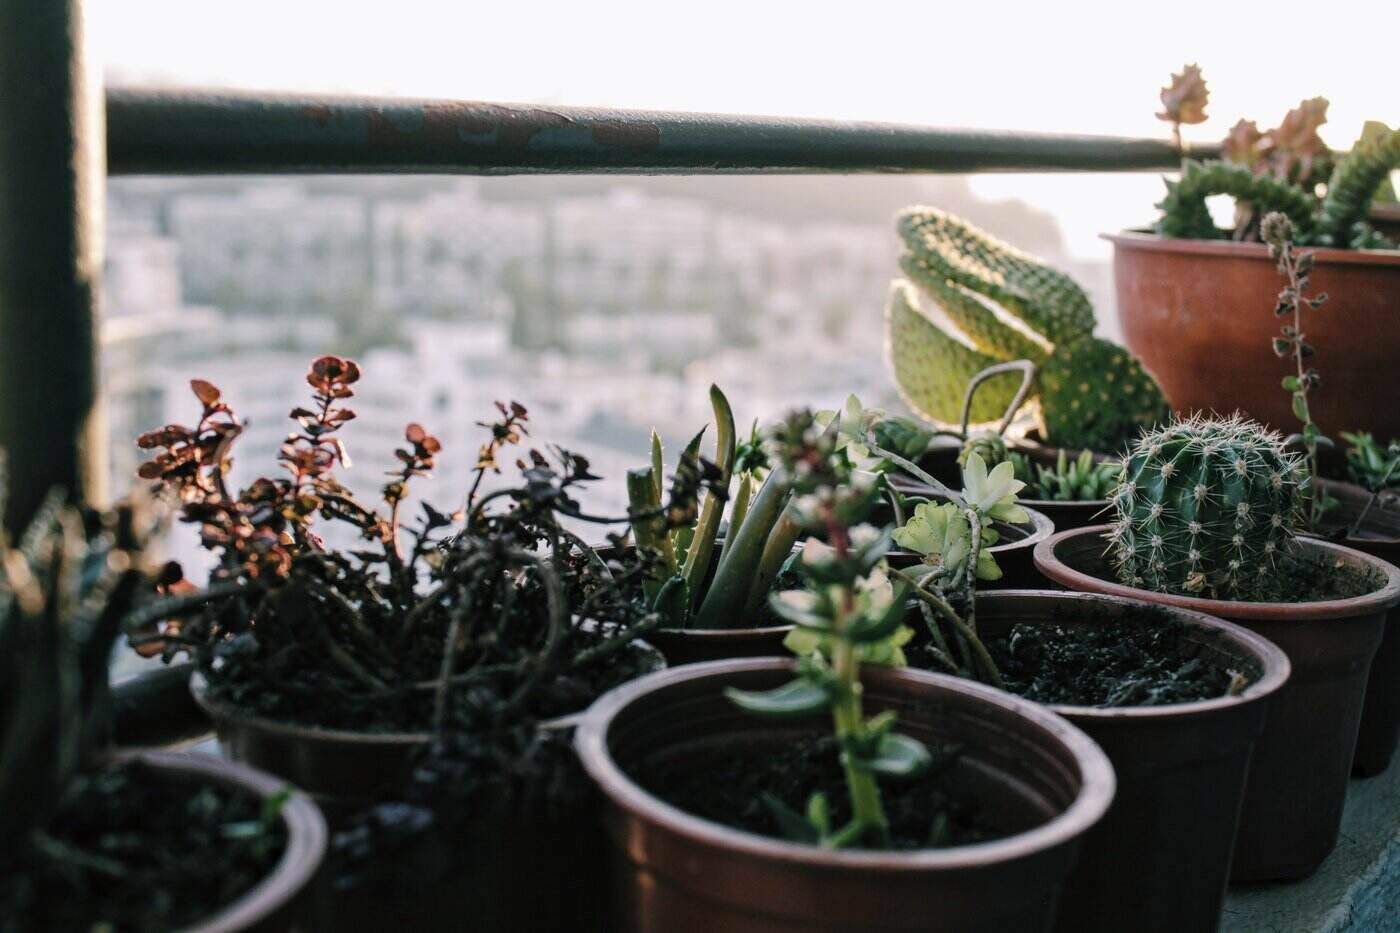 succulents in pots by large window - how to grow and care for succulents indoors